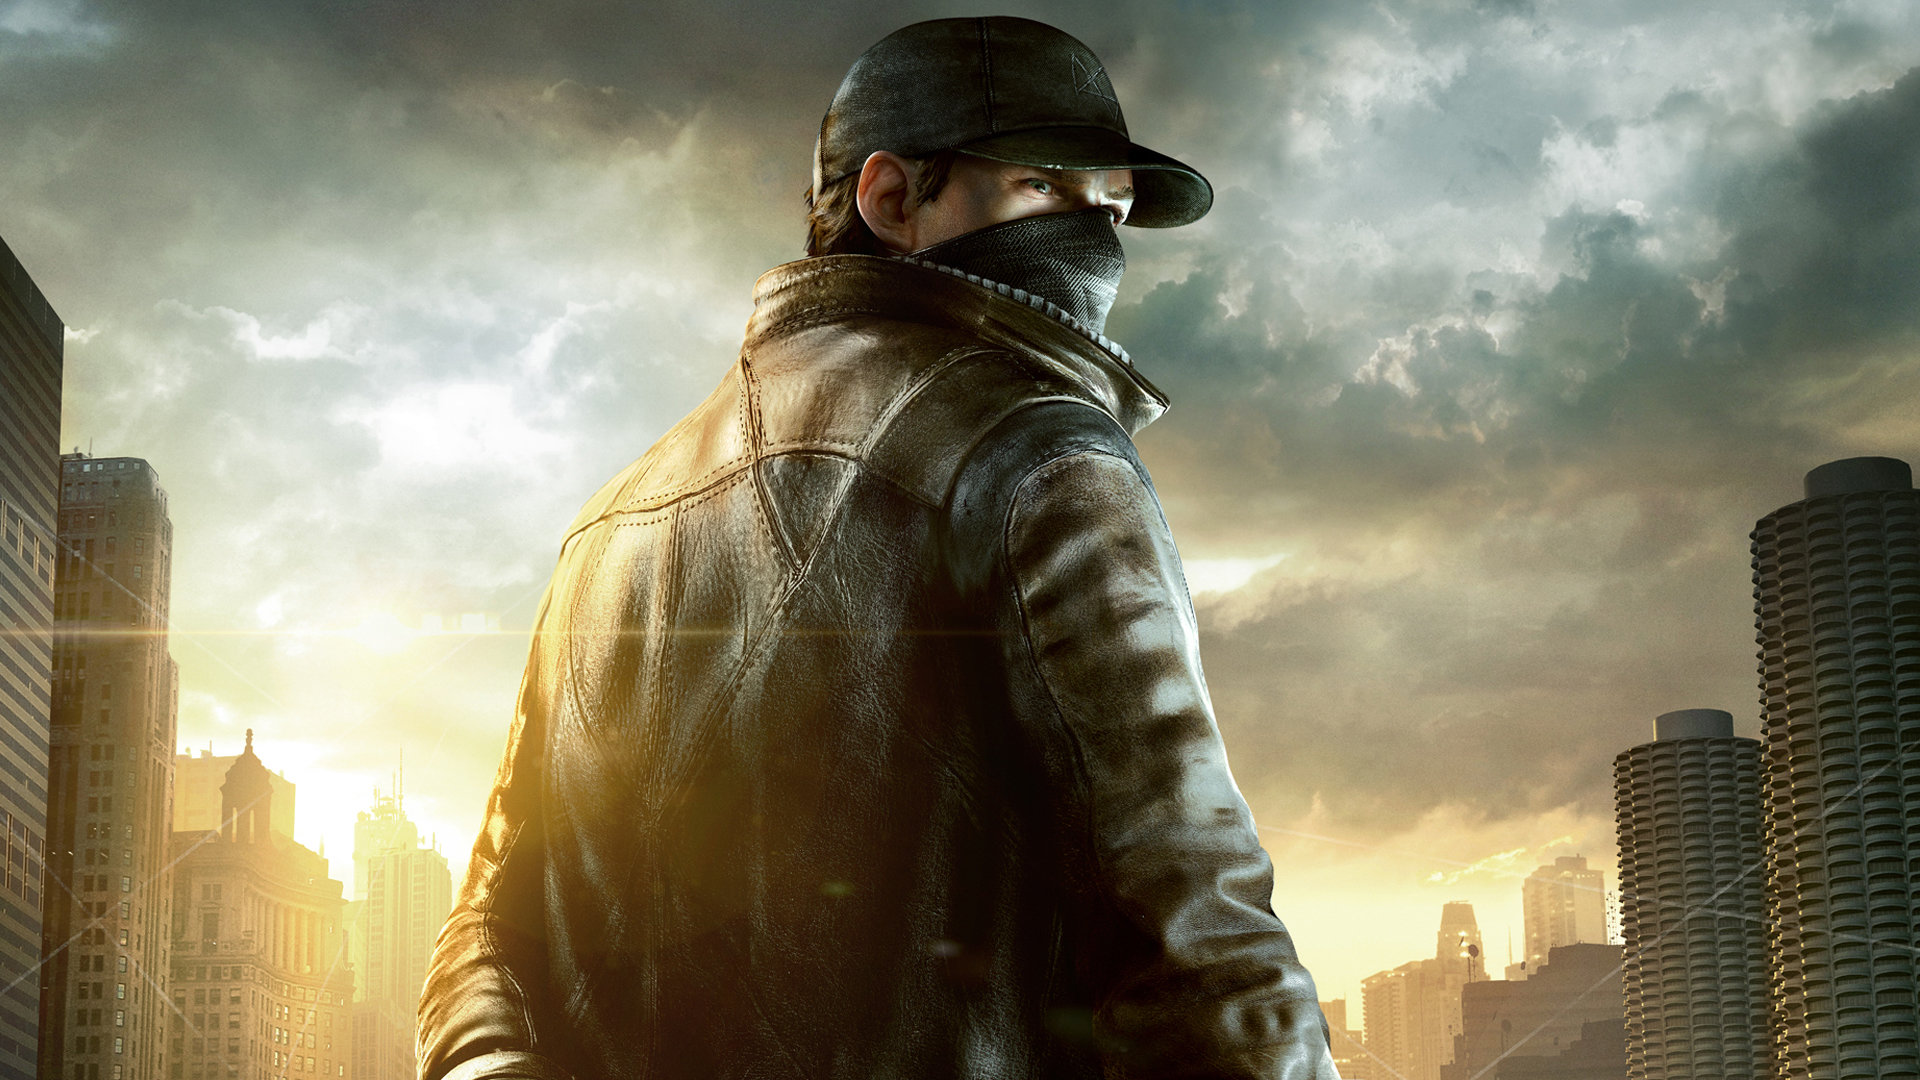 Awesome Watch Dogs free background ID:117292 for full hd desktop